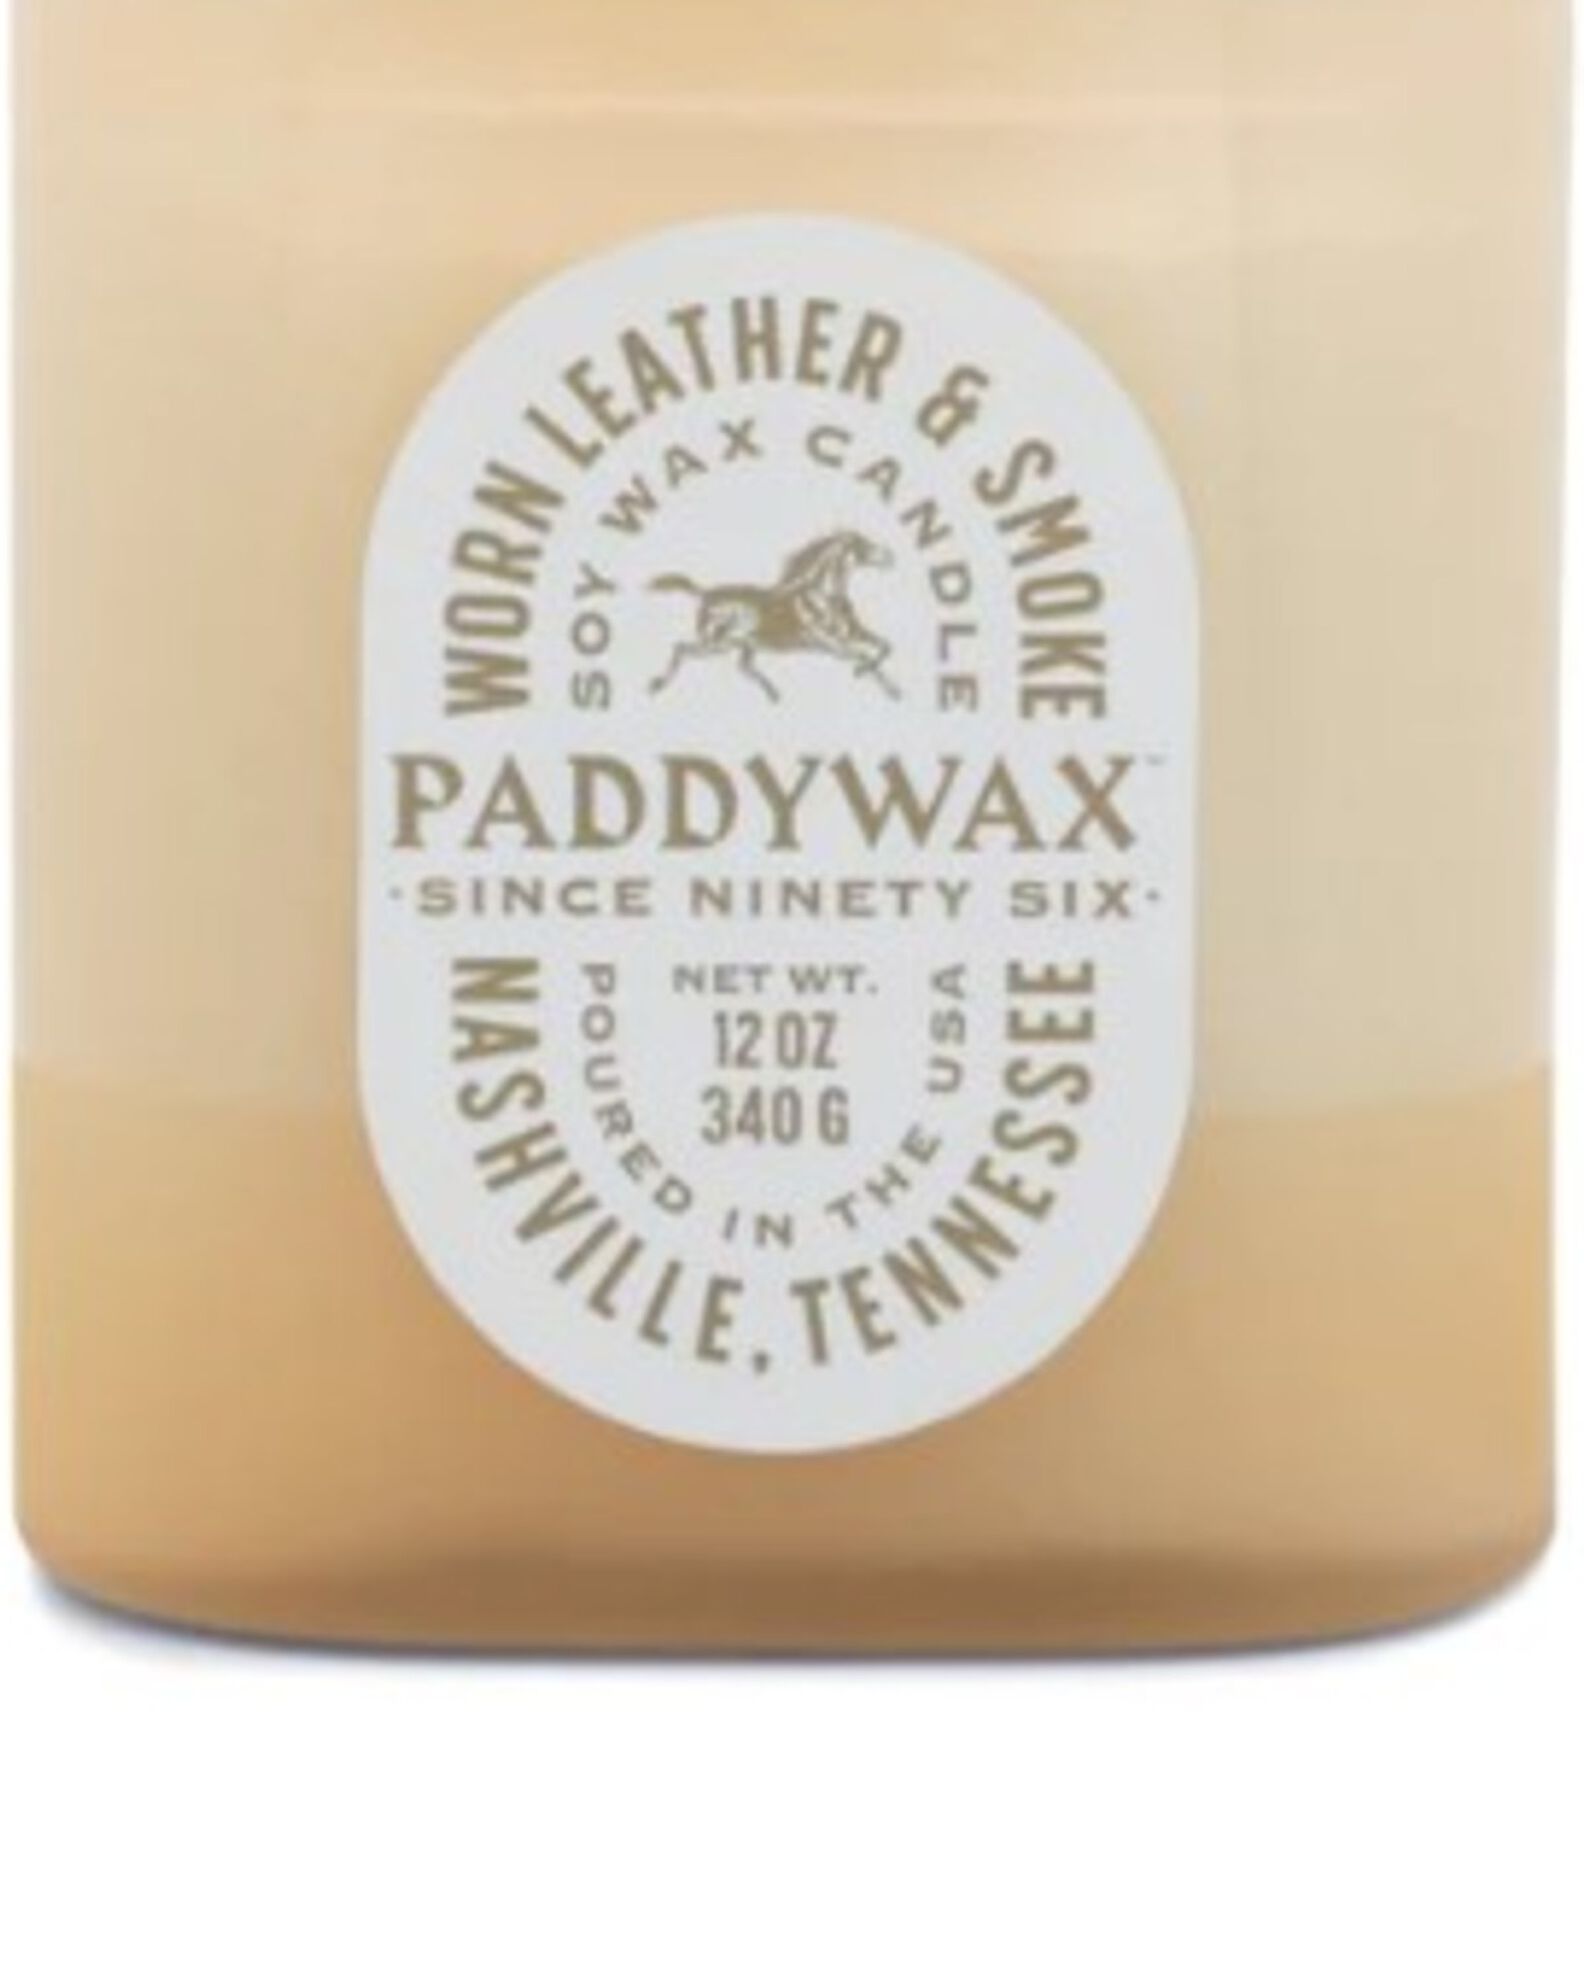 Paddywax Cactus Flower & Aloe Candle